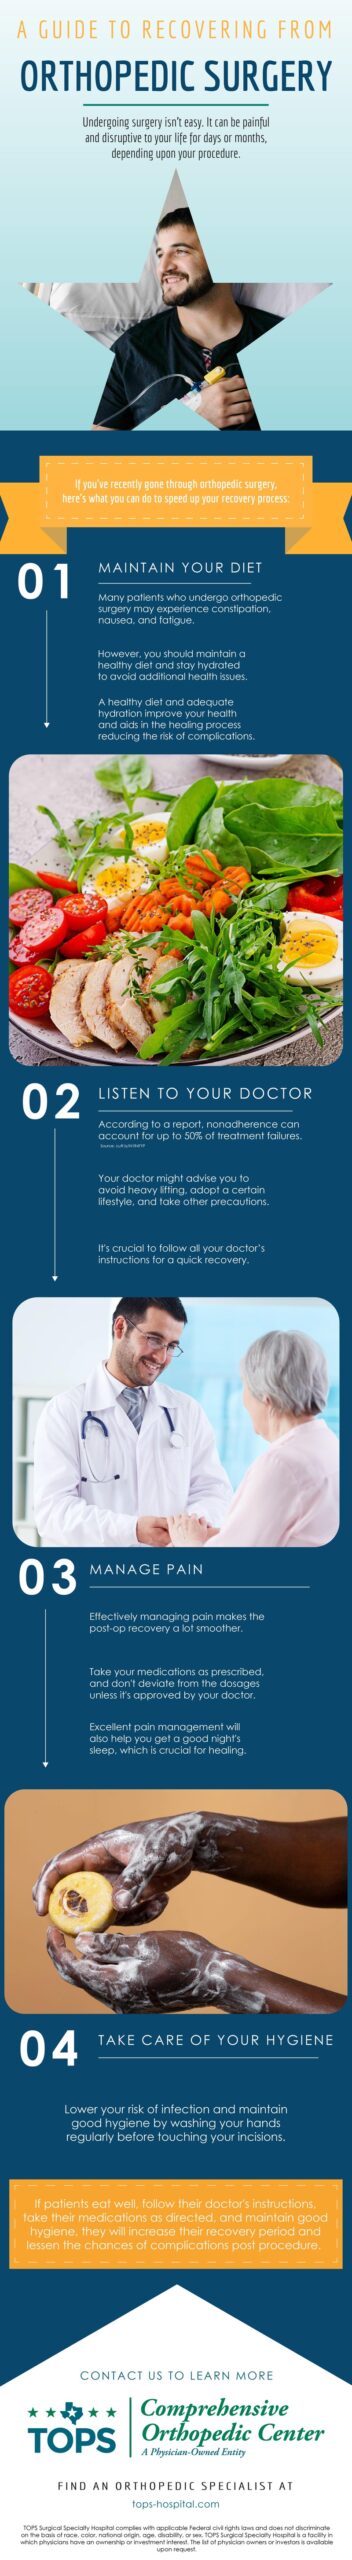 A Guide To Recovering From Orthopedic Surgery